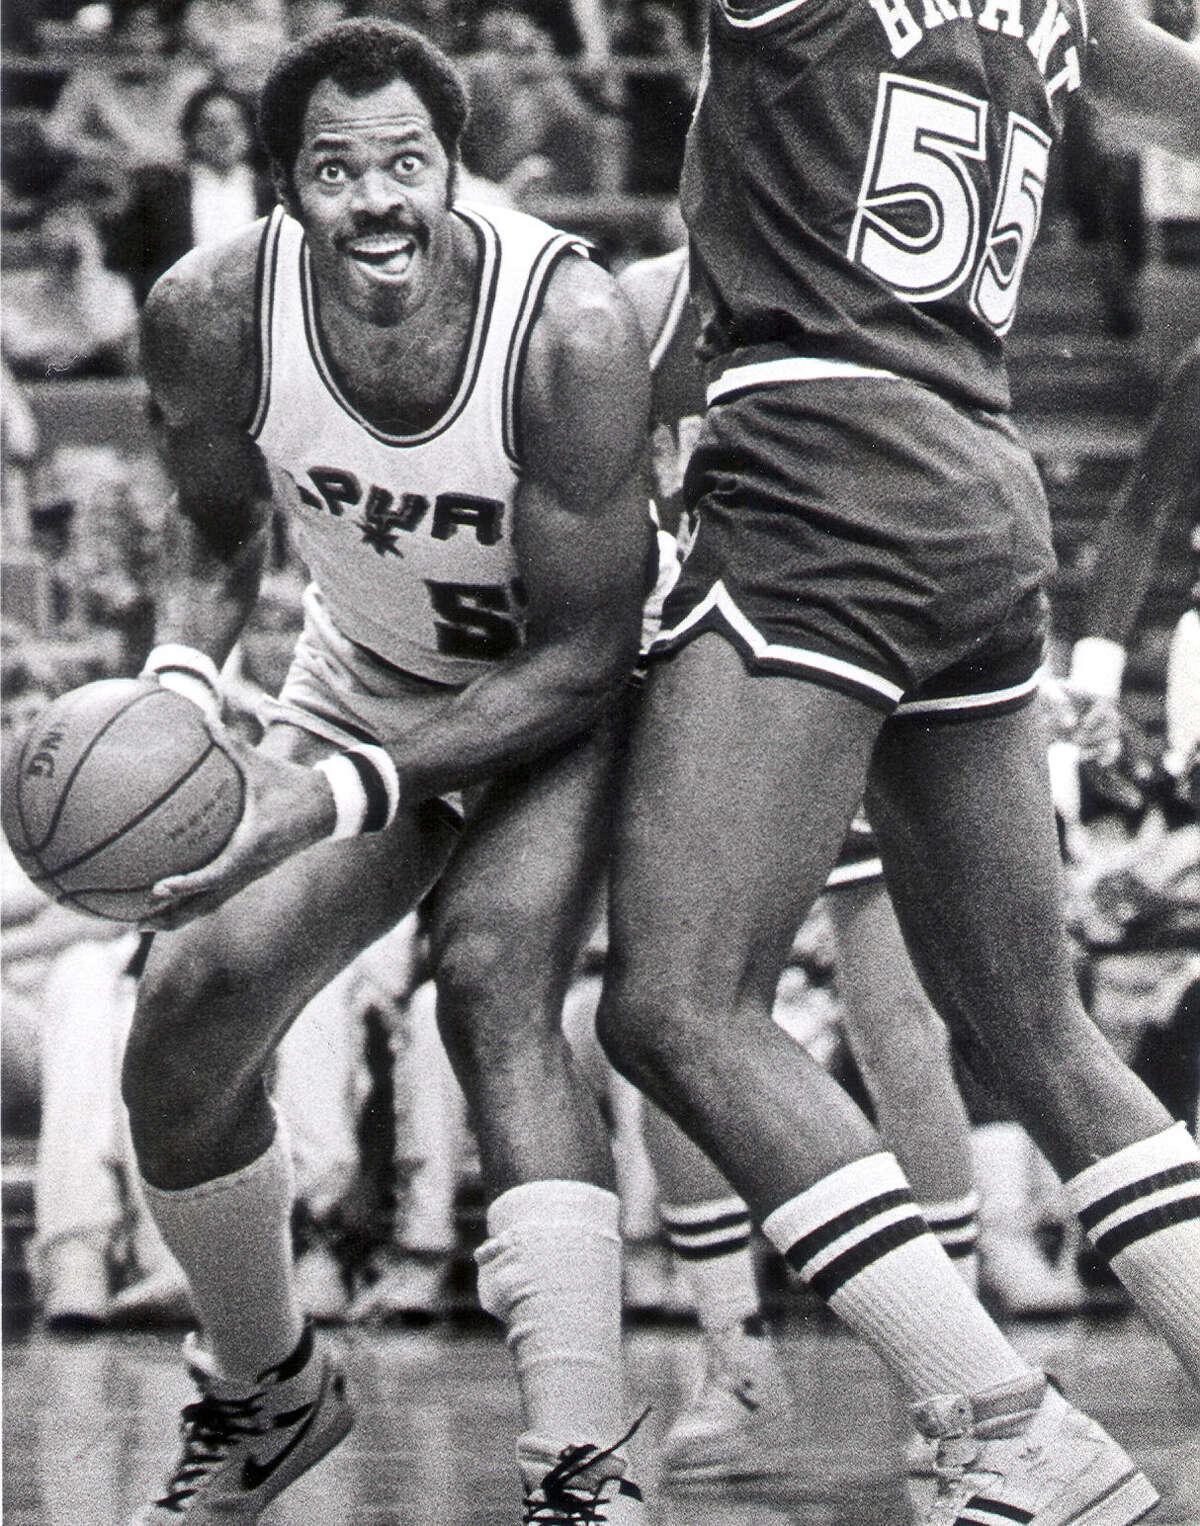 Former Spur Artis Gilmore, who was inducted into the Naismith Hall of Fame in 2011, played in 11 all-star games in 18 seasons of professional basketball.